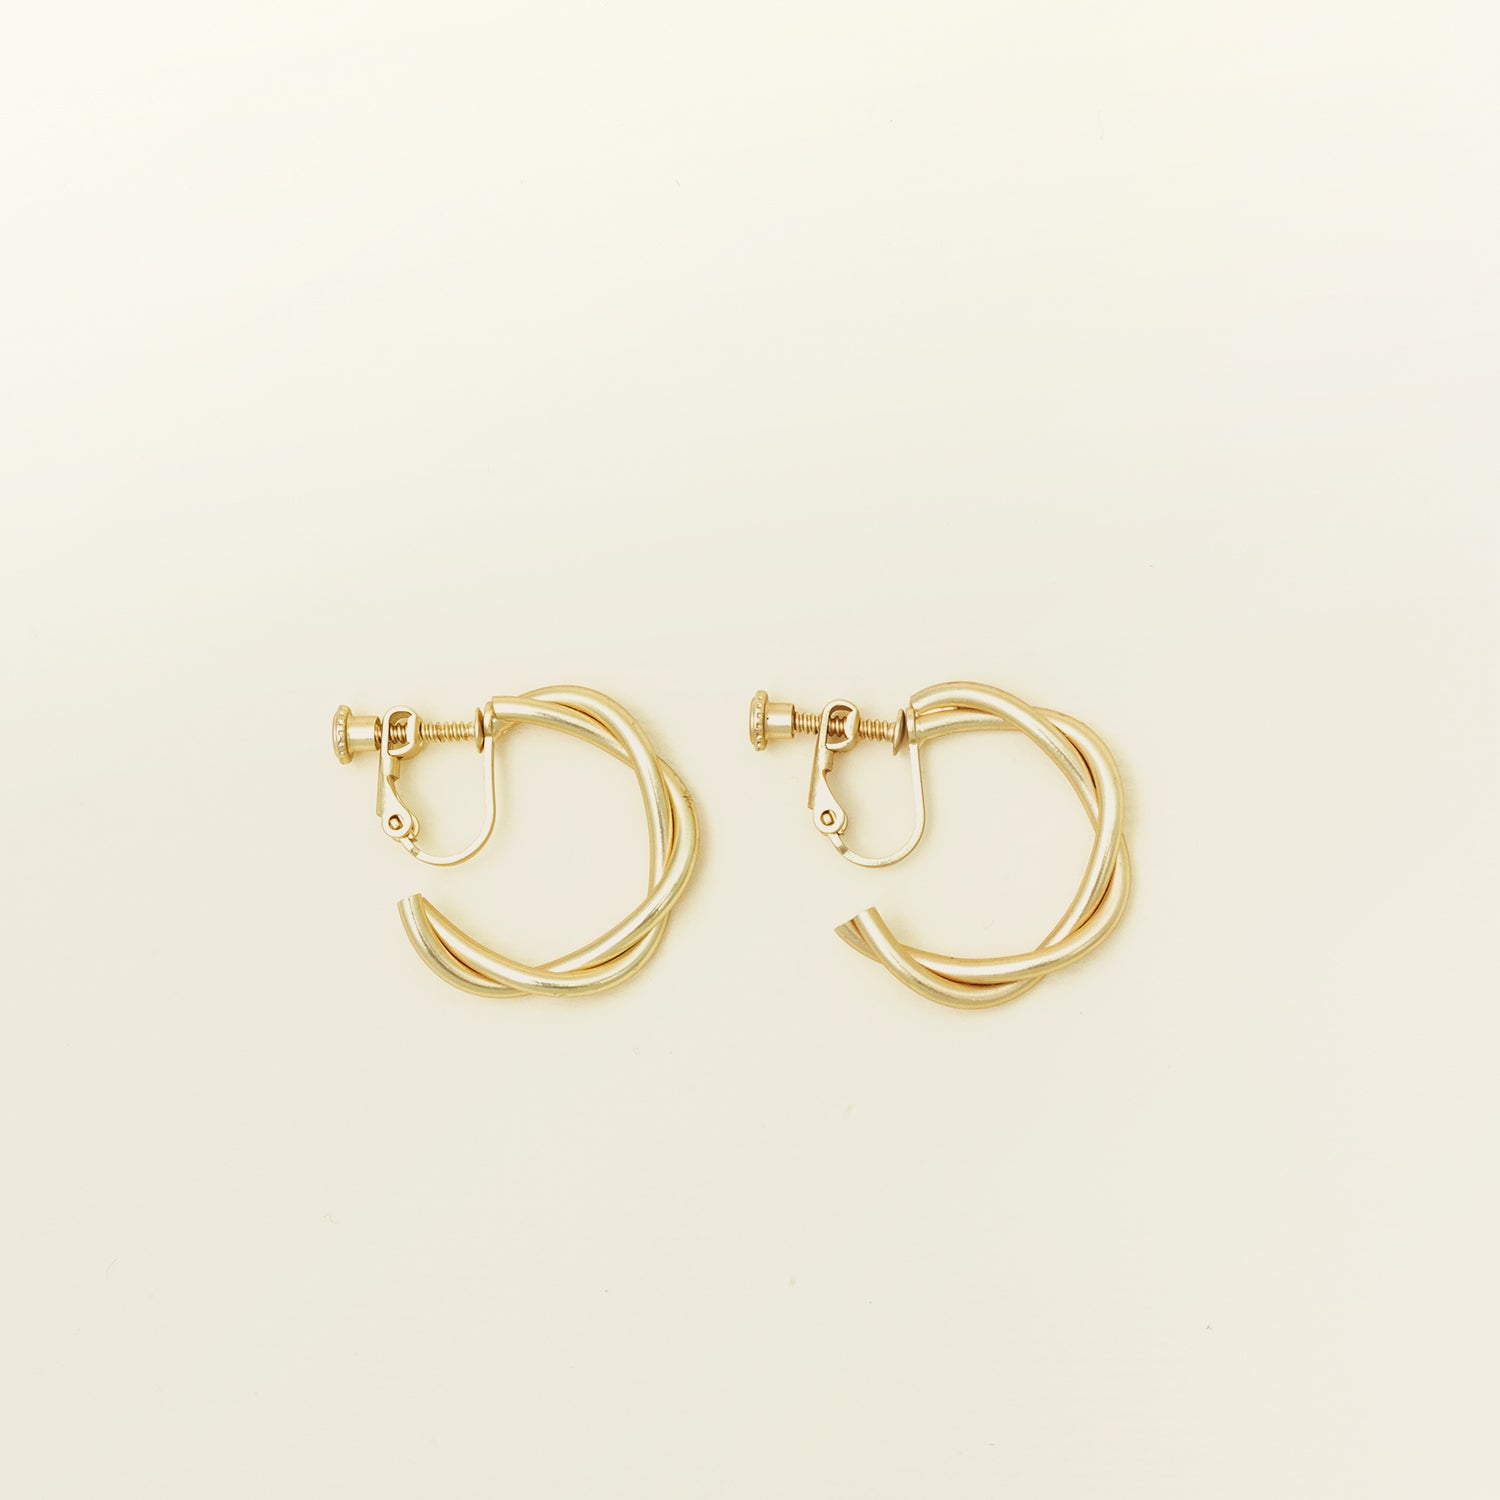 Image of the Twist Hoop Earrings feature a secure and comfortable screwback clip-on closure ideal for all ear types.